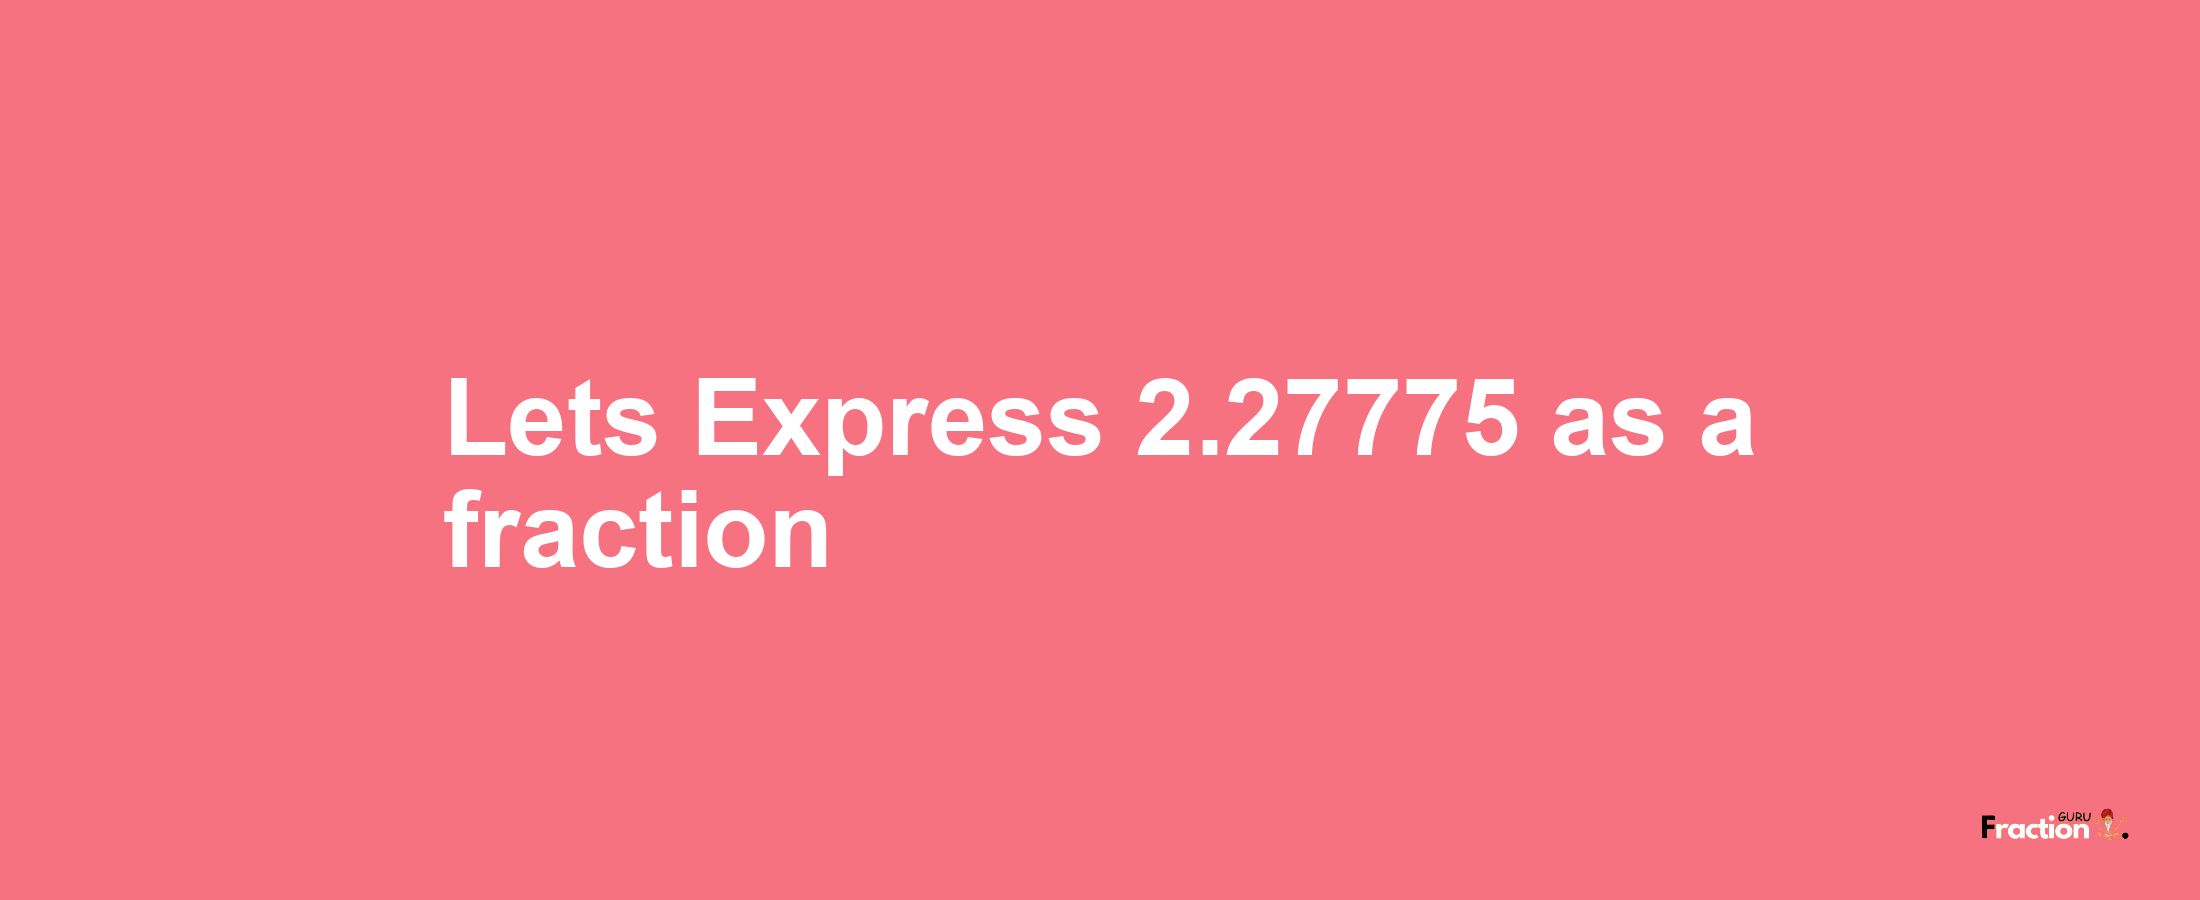 Lets Express 2.27775 as afraction